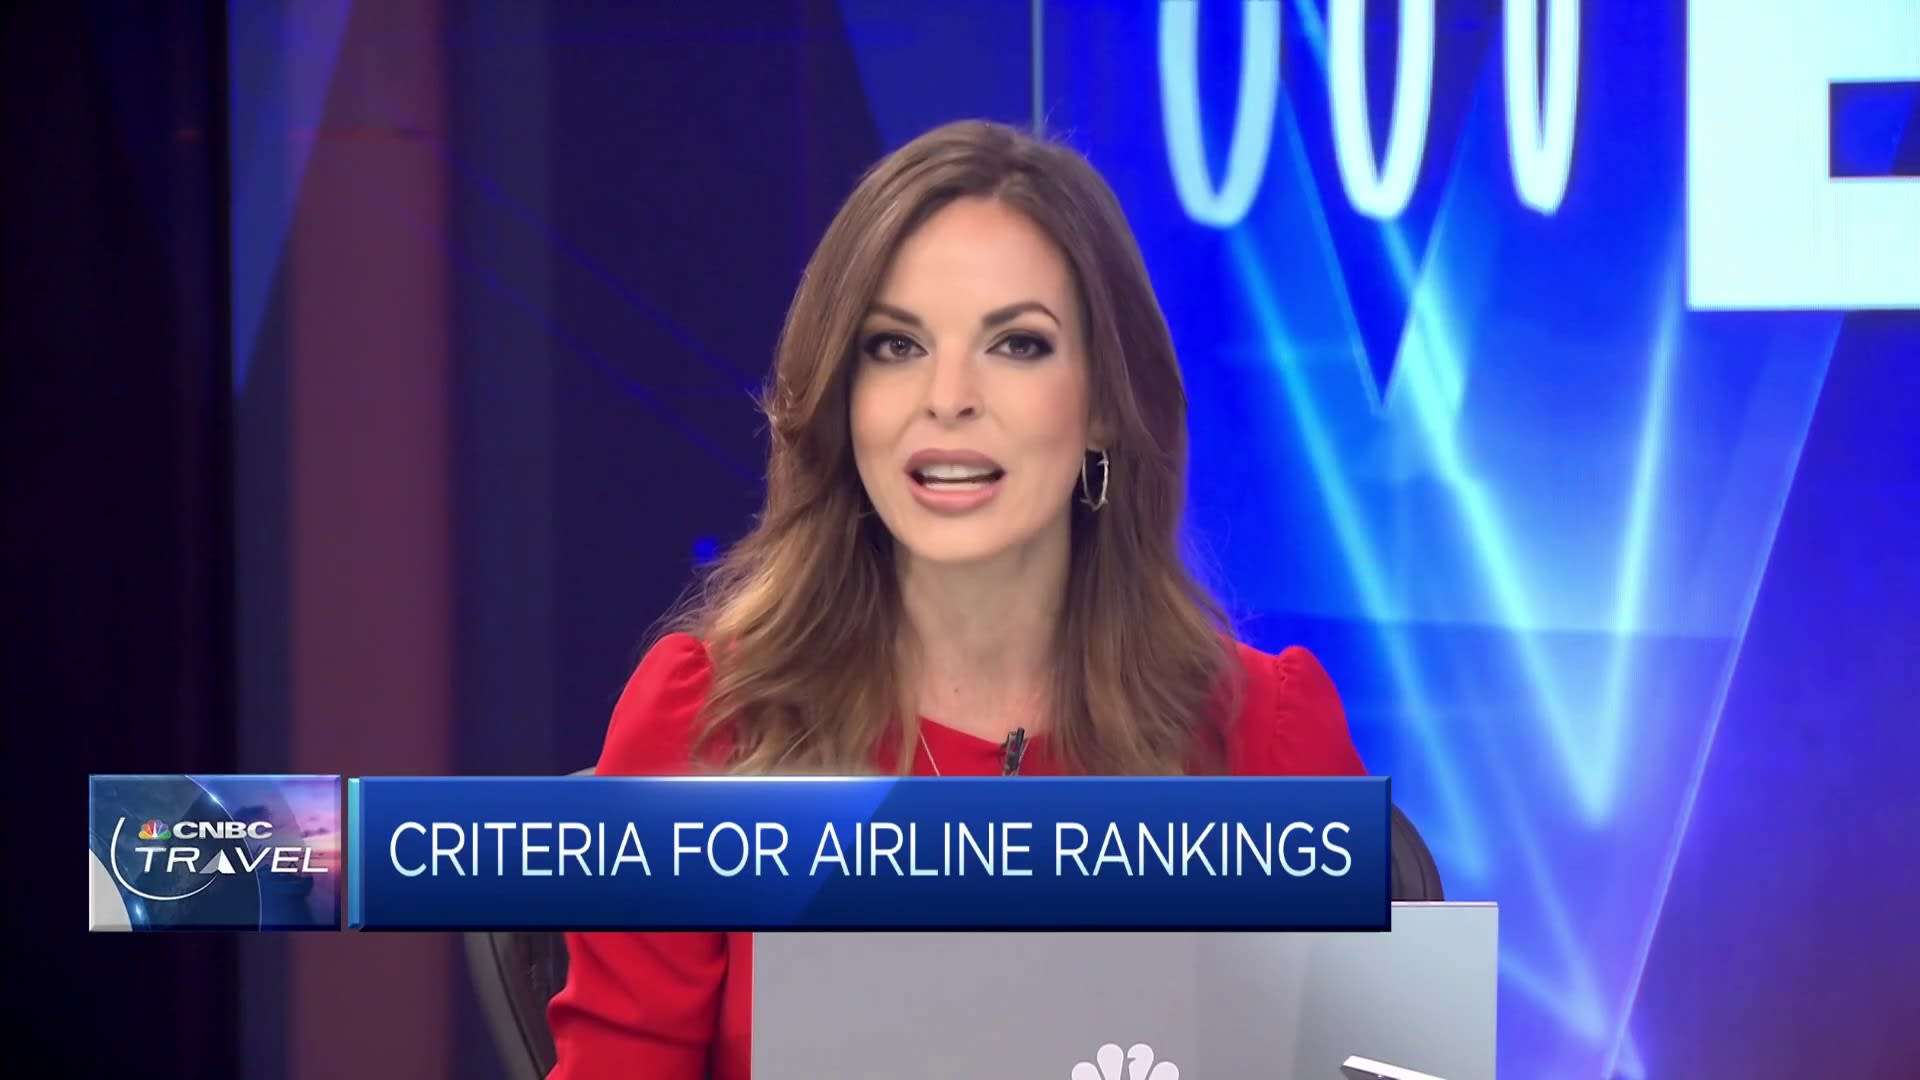 Canceled flights? Lost bags? See how airlines rank when problems arise